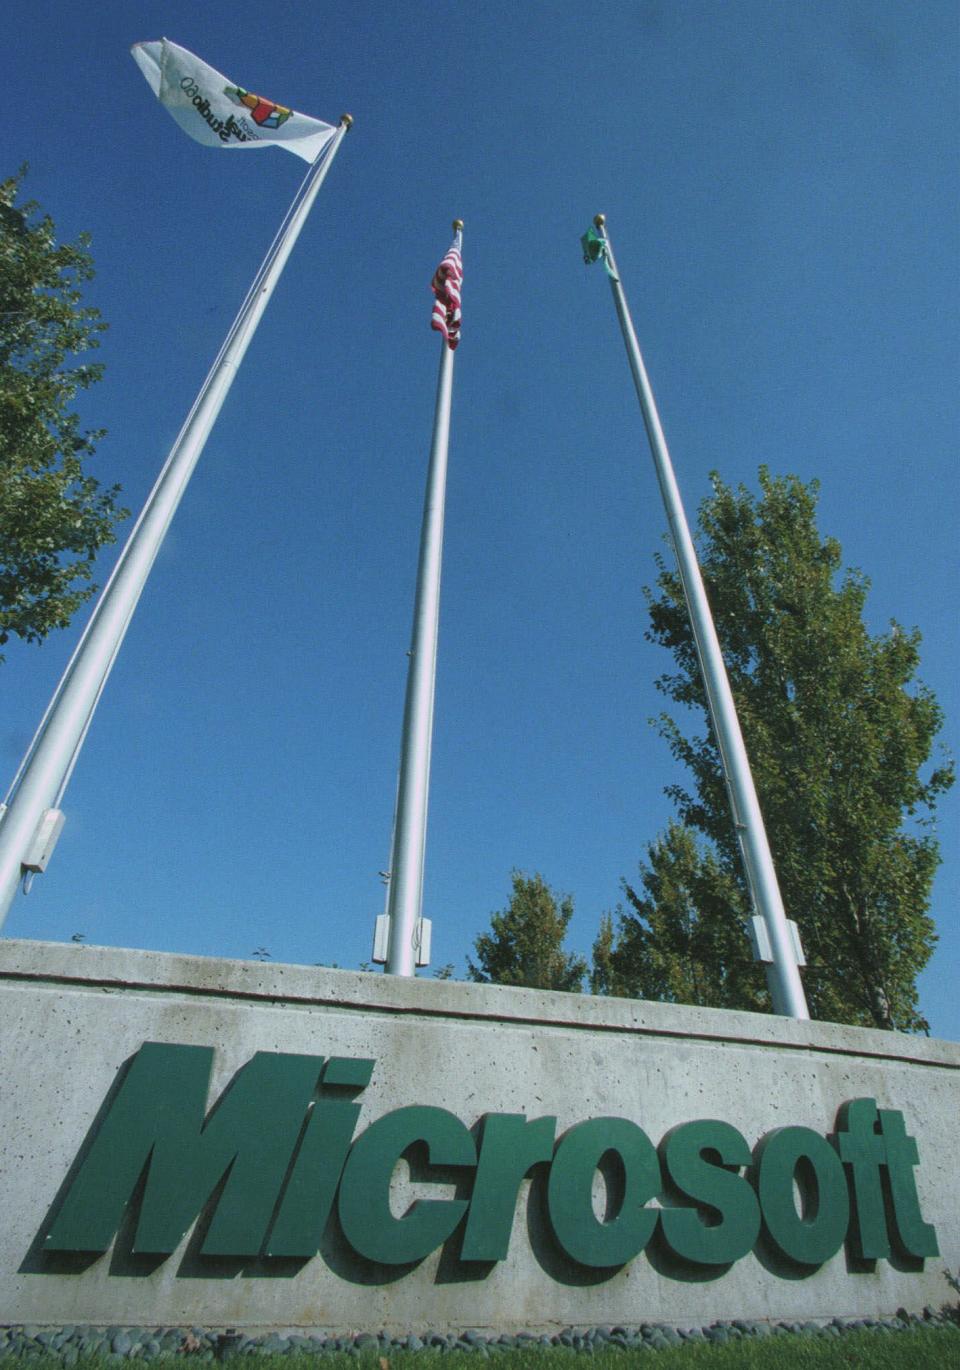 FILE - This set of flagpoles sits at one of the entrances to Microsoft Corporation in Redmond, Wash., in this Oct.19, 1998 file photo. The General Court of the European Union has upheld most of a massive fine against Microsoft Corp. by the European Commission's competition watchdog in 2008. In a ruling Wednesday, June 27, 2012, it rejected Microsoft's appeal but did cut the fine by €39 million to €860 million ($1.1 billion). (AP Photo/Joe Brokert, File)